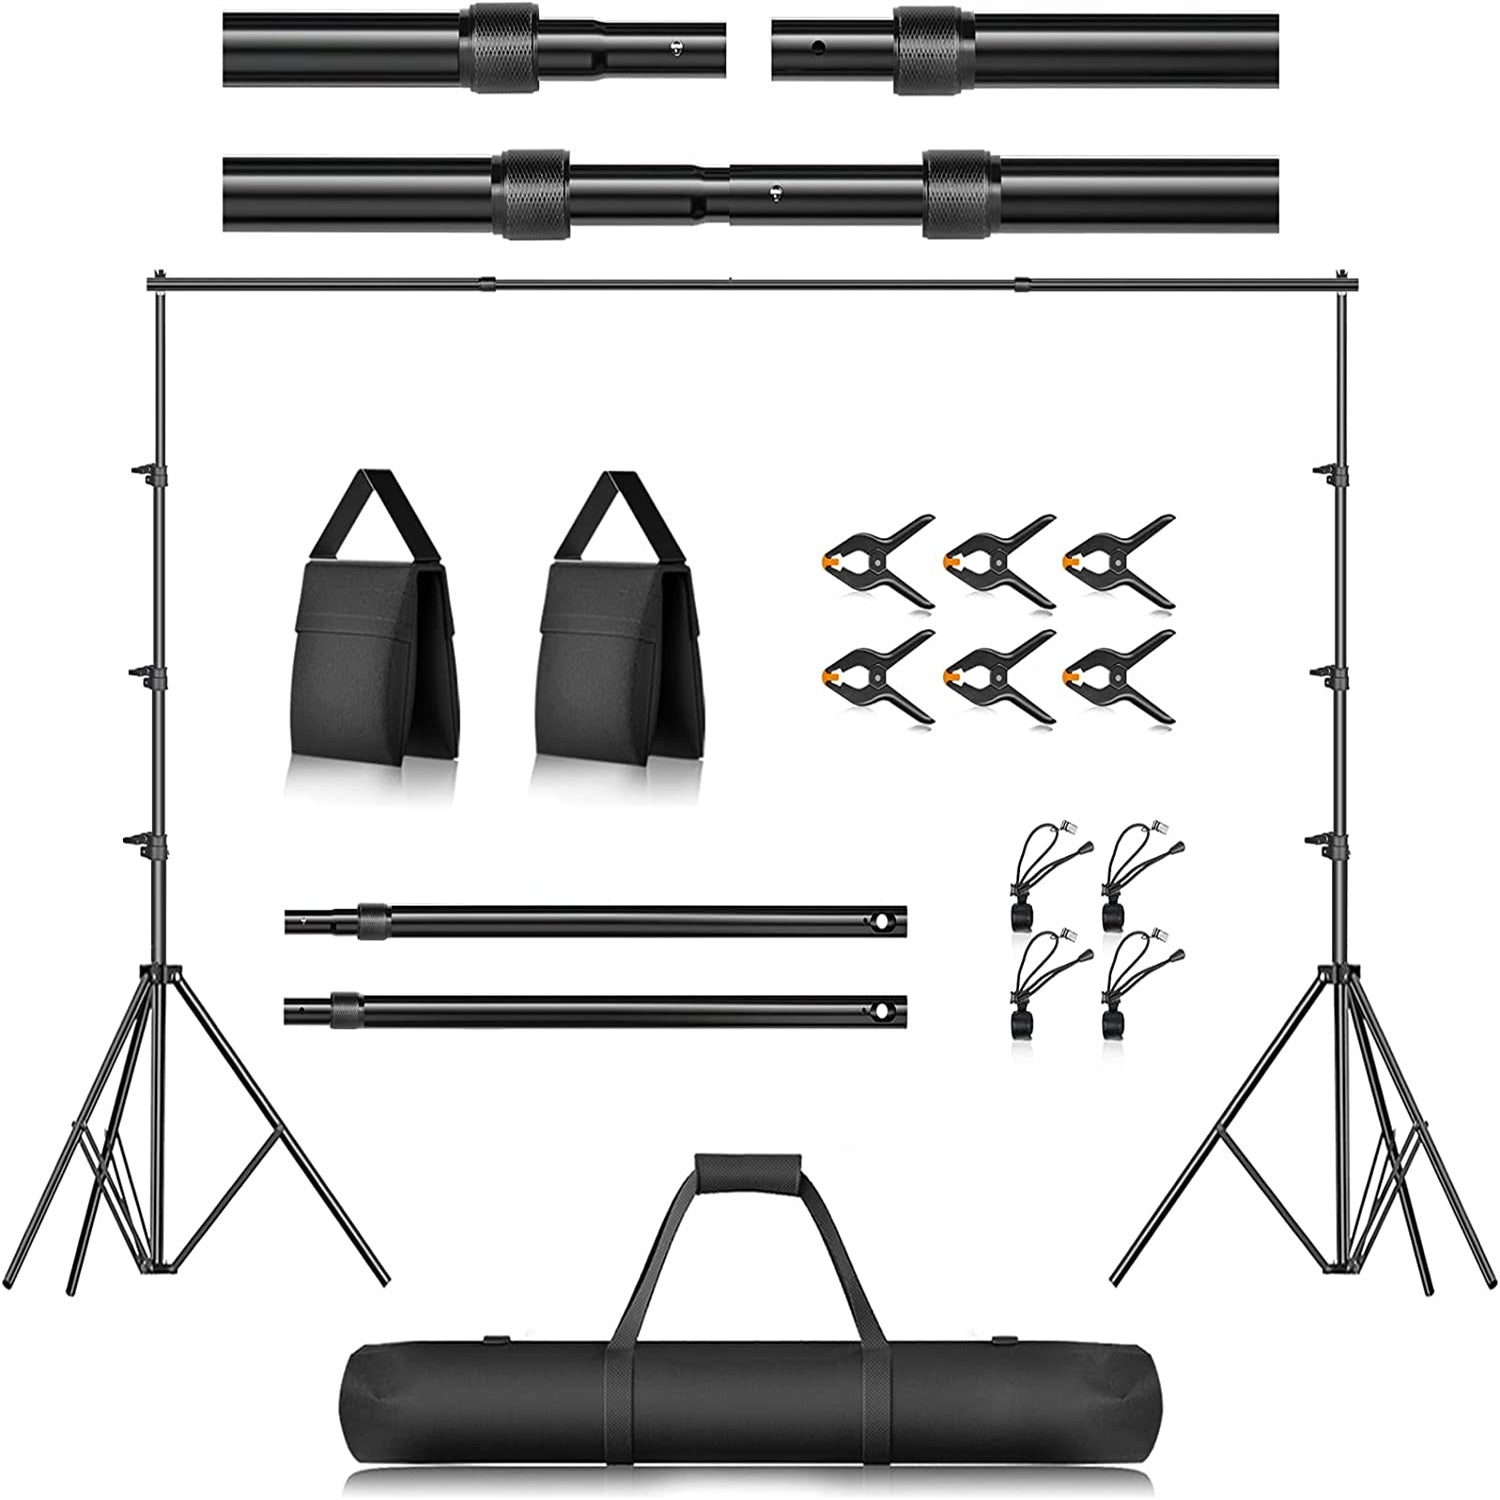 8.5 x 10 ft Upgraded Backdrop Stand Kit with Adjustable Knob Crossbars